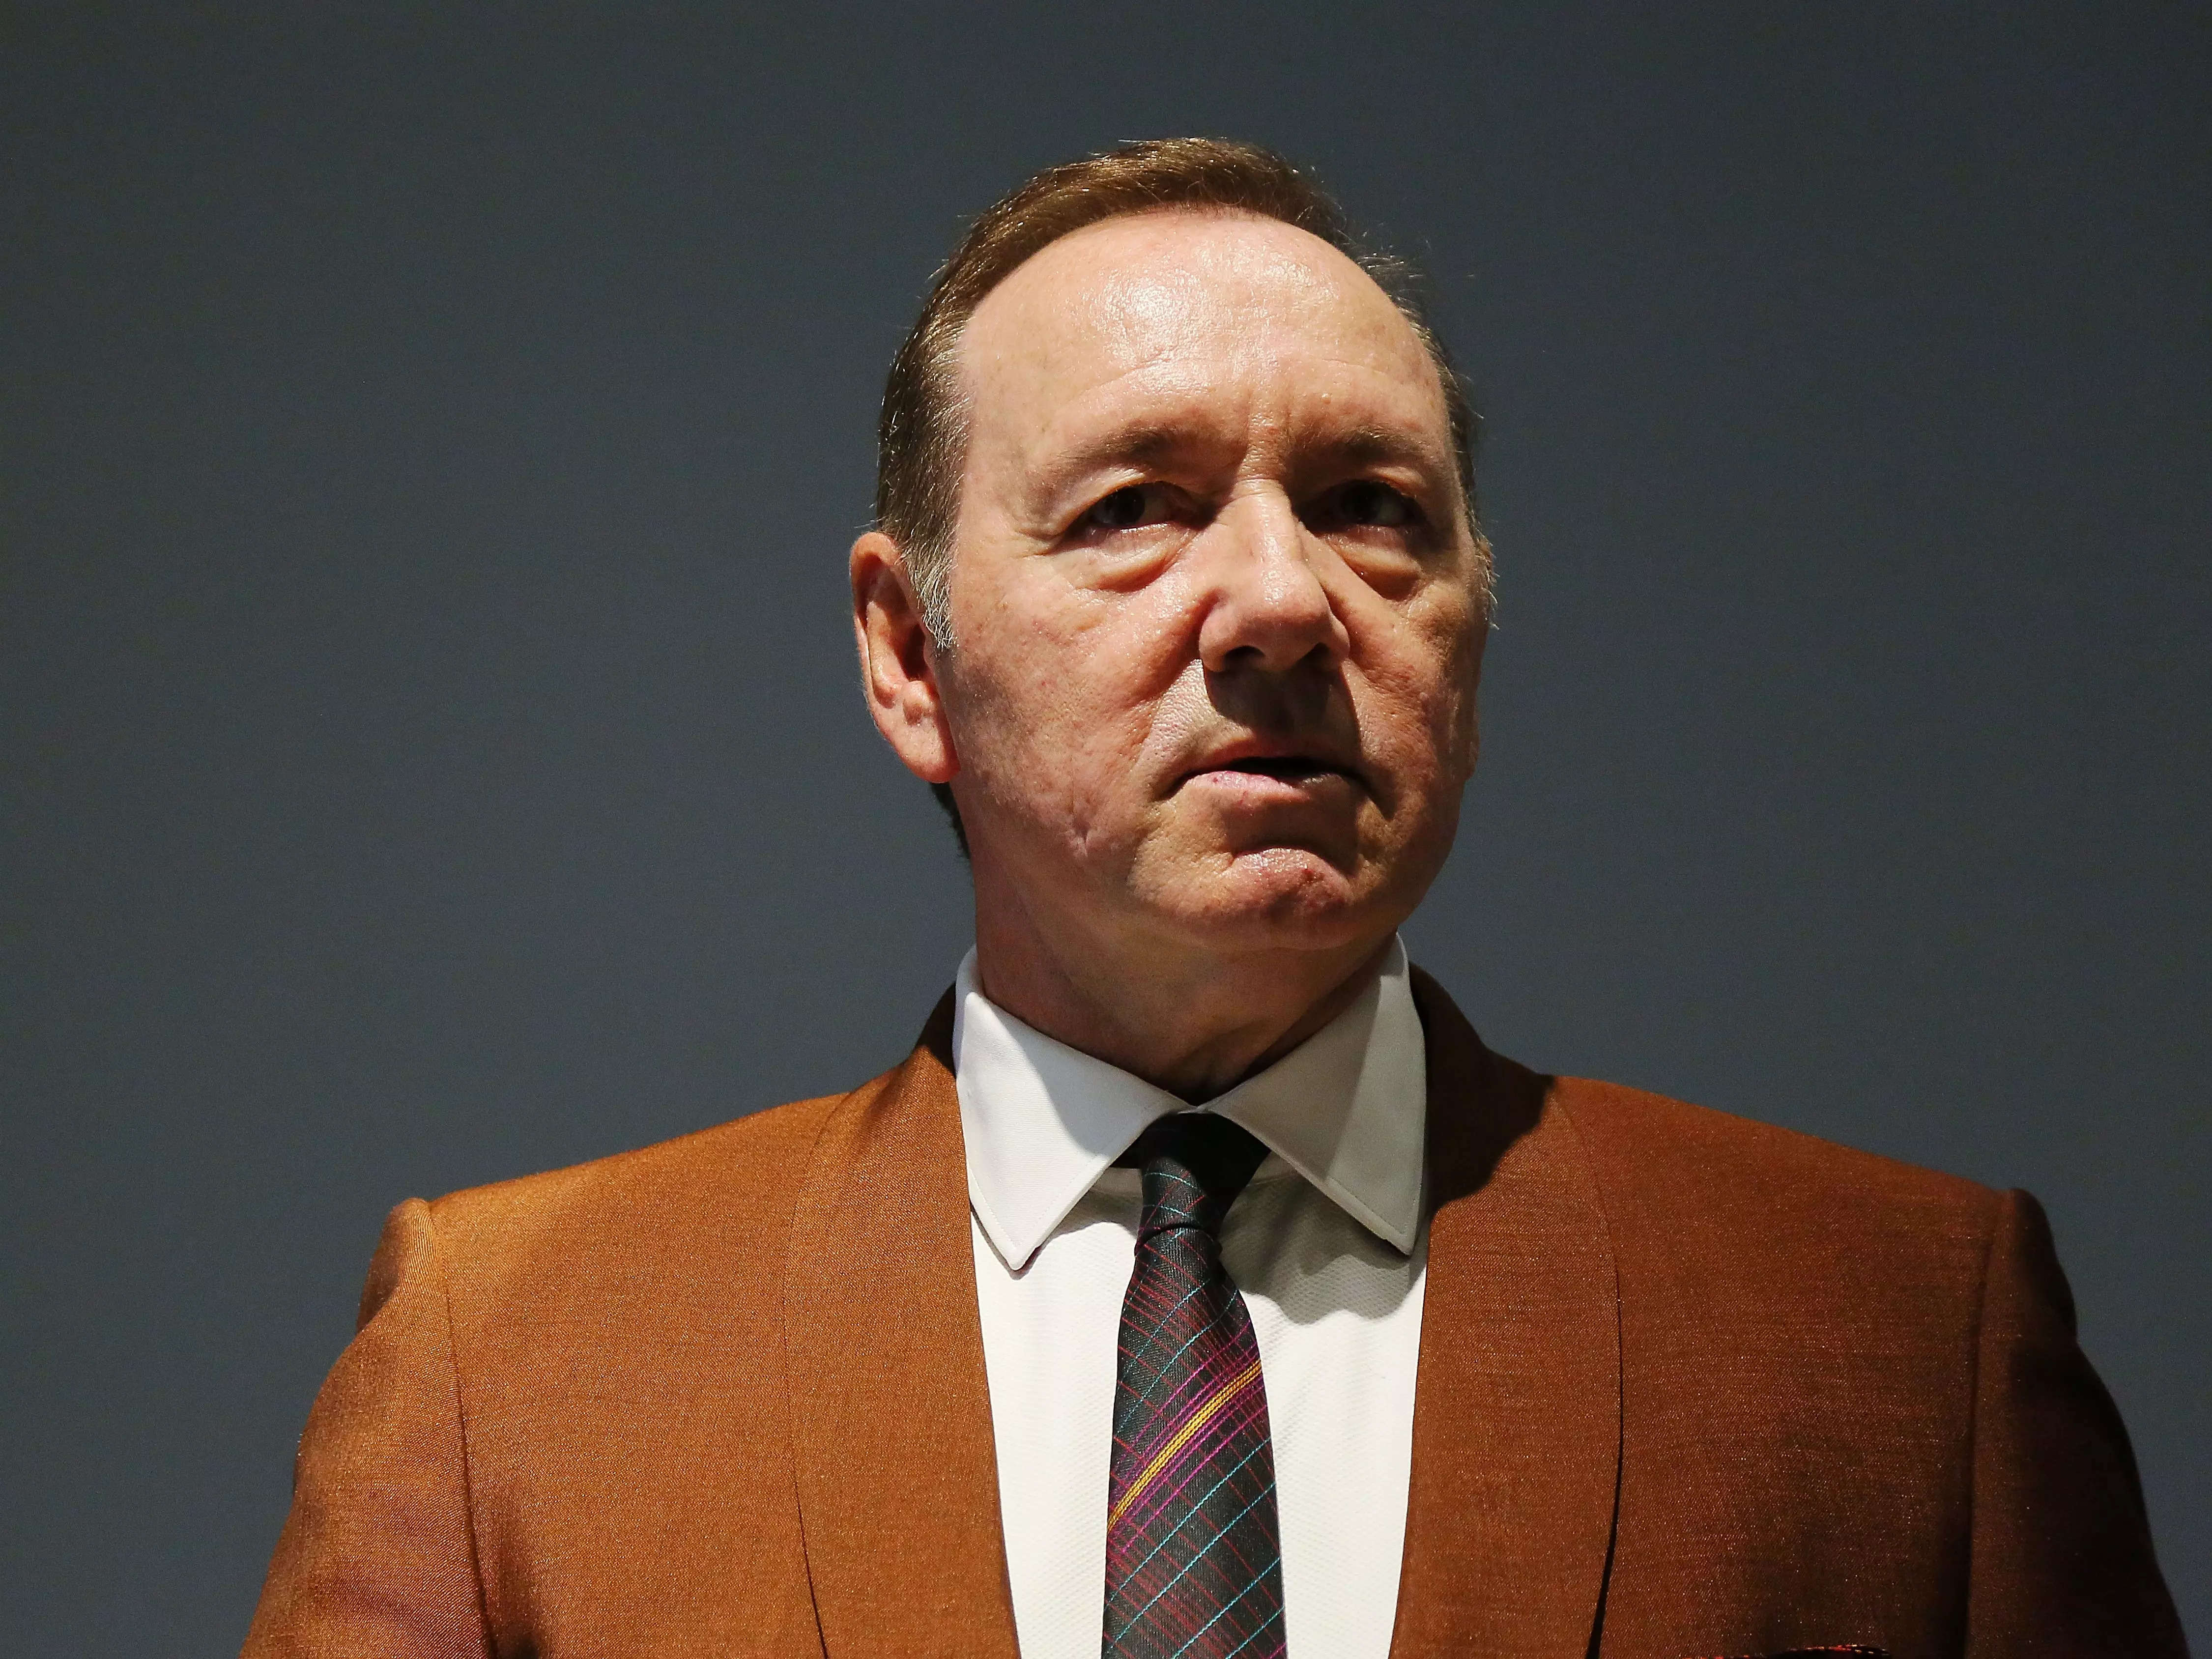 Kevin Spacey Has Been Charged With 4 Counts Of Sexual Assault Against 3 Men In The Uk Business